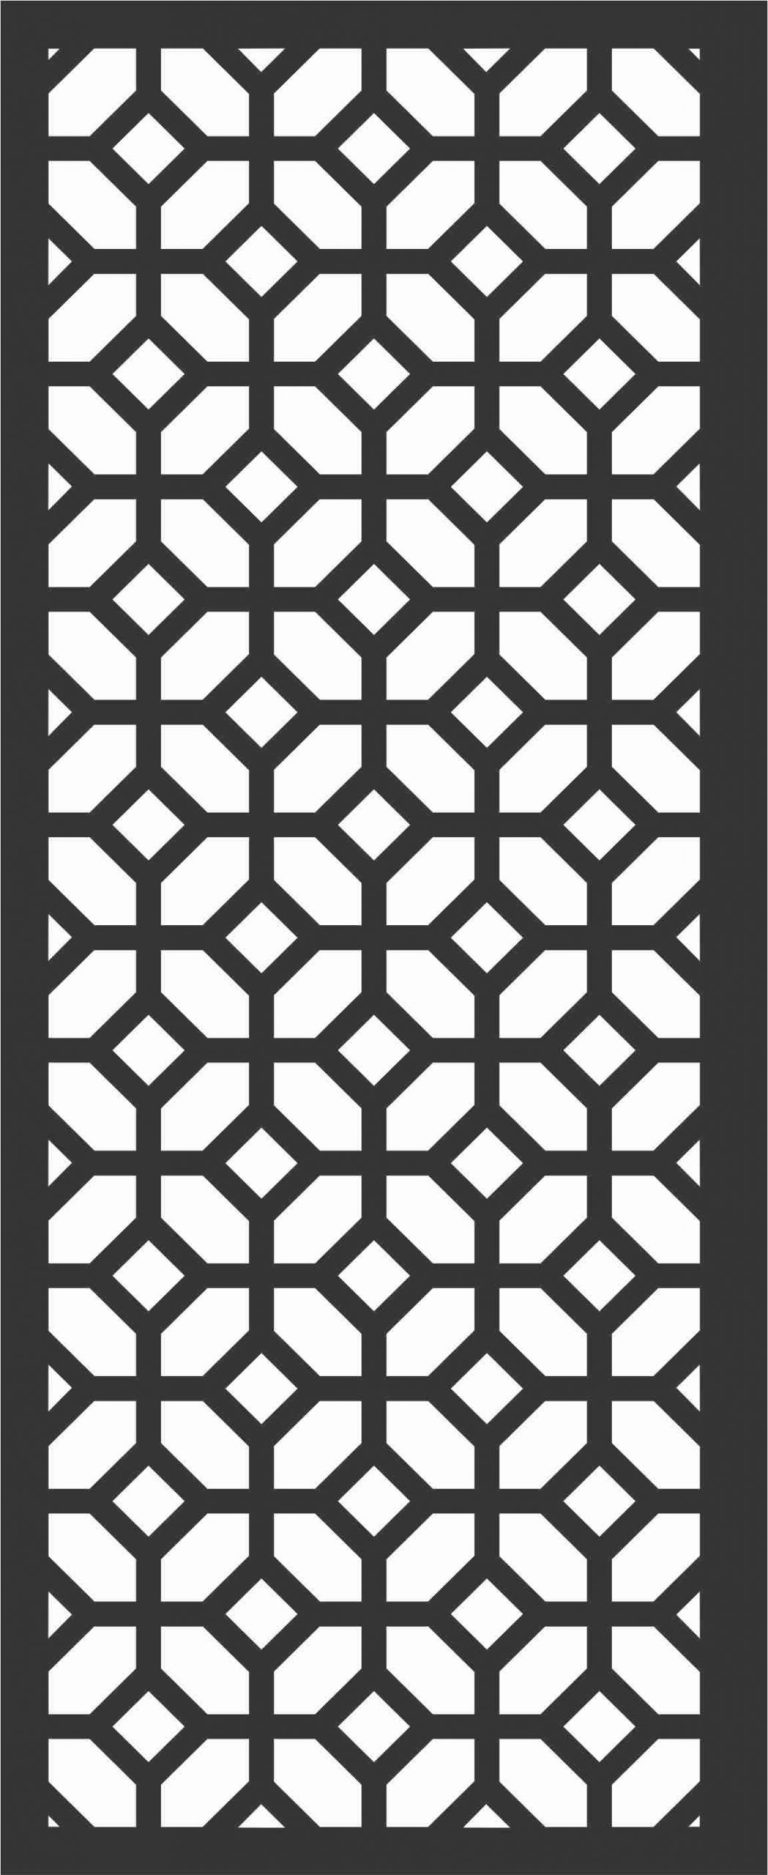 Trendy Grill Screen Panel DXF File